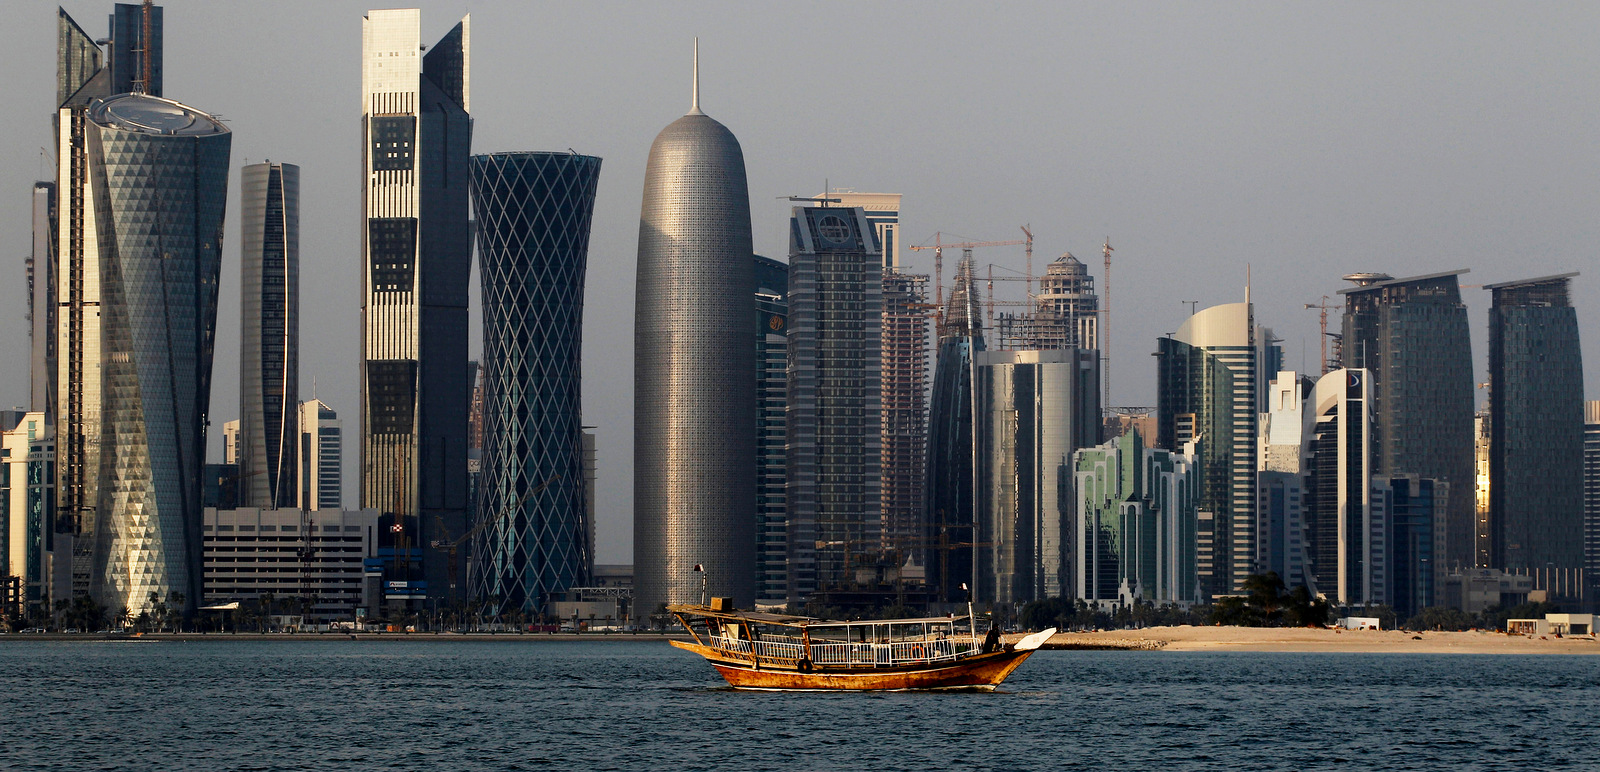 A traditional dhow floats in the Corniche Bay of Doha, Qatar. Saudi media reported, April 9, 2018, a proposal to dig a maritime canal along the kingdom's closed border with Qatar, turning the peninsula-nation into an island and further isolating it. Saudi Arabia's state-linked Sabq and al-Riyadh newspapers carried nearly identical reports on Monday saying that the so-called Salwa Marine Canal project would be funded by Saudi and Emirati investors and carried out by Egyptian developers. (AP/Saurabh Das)